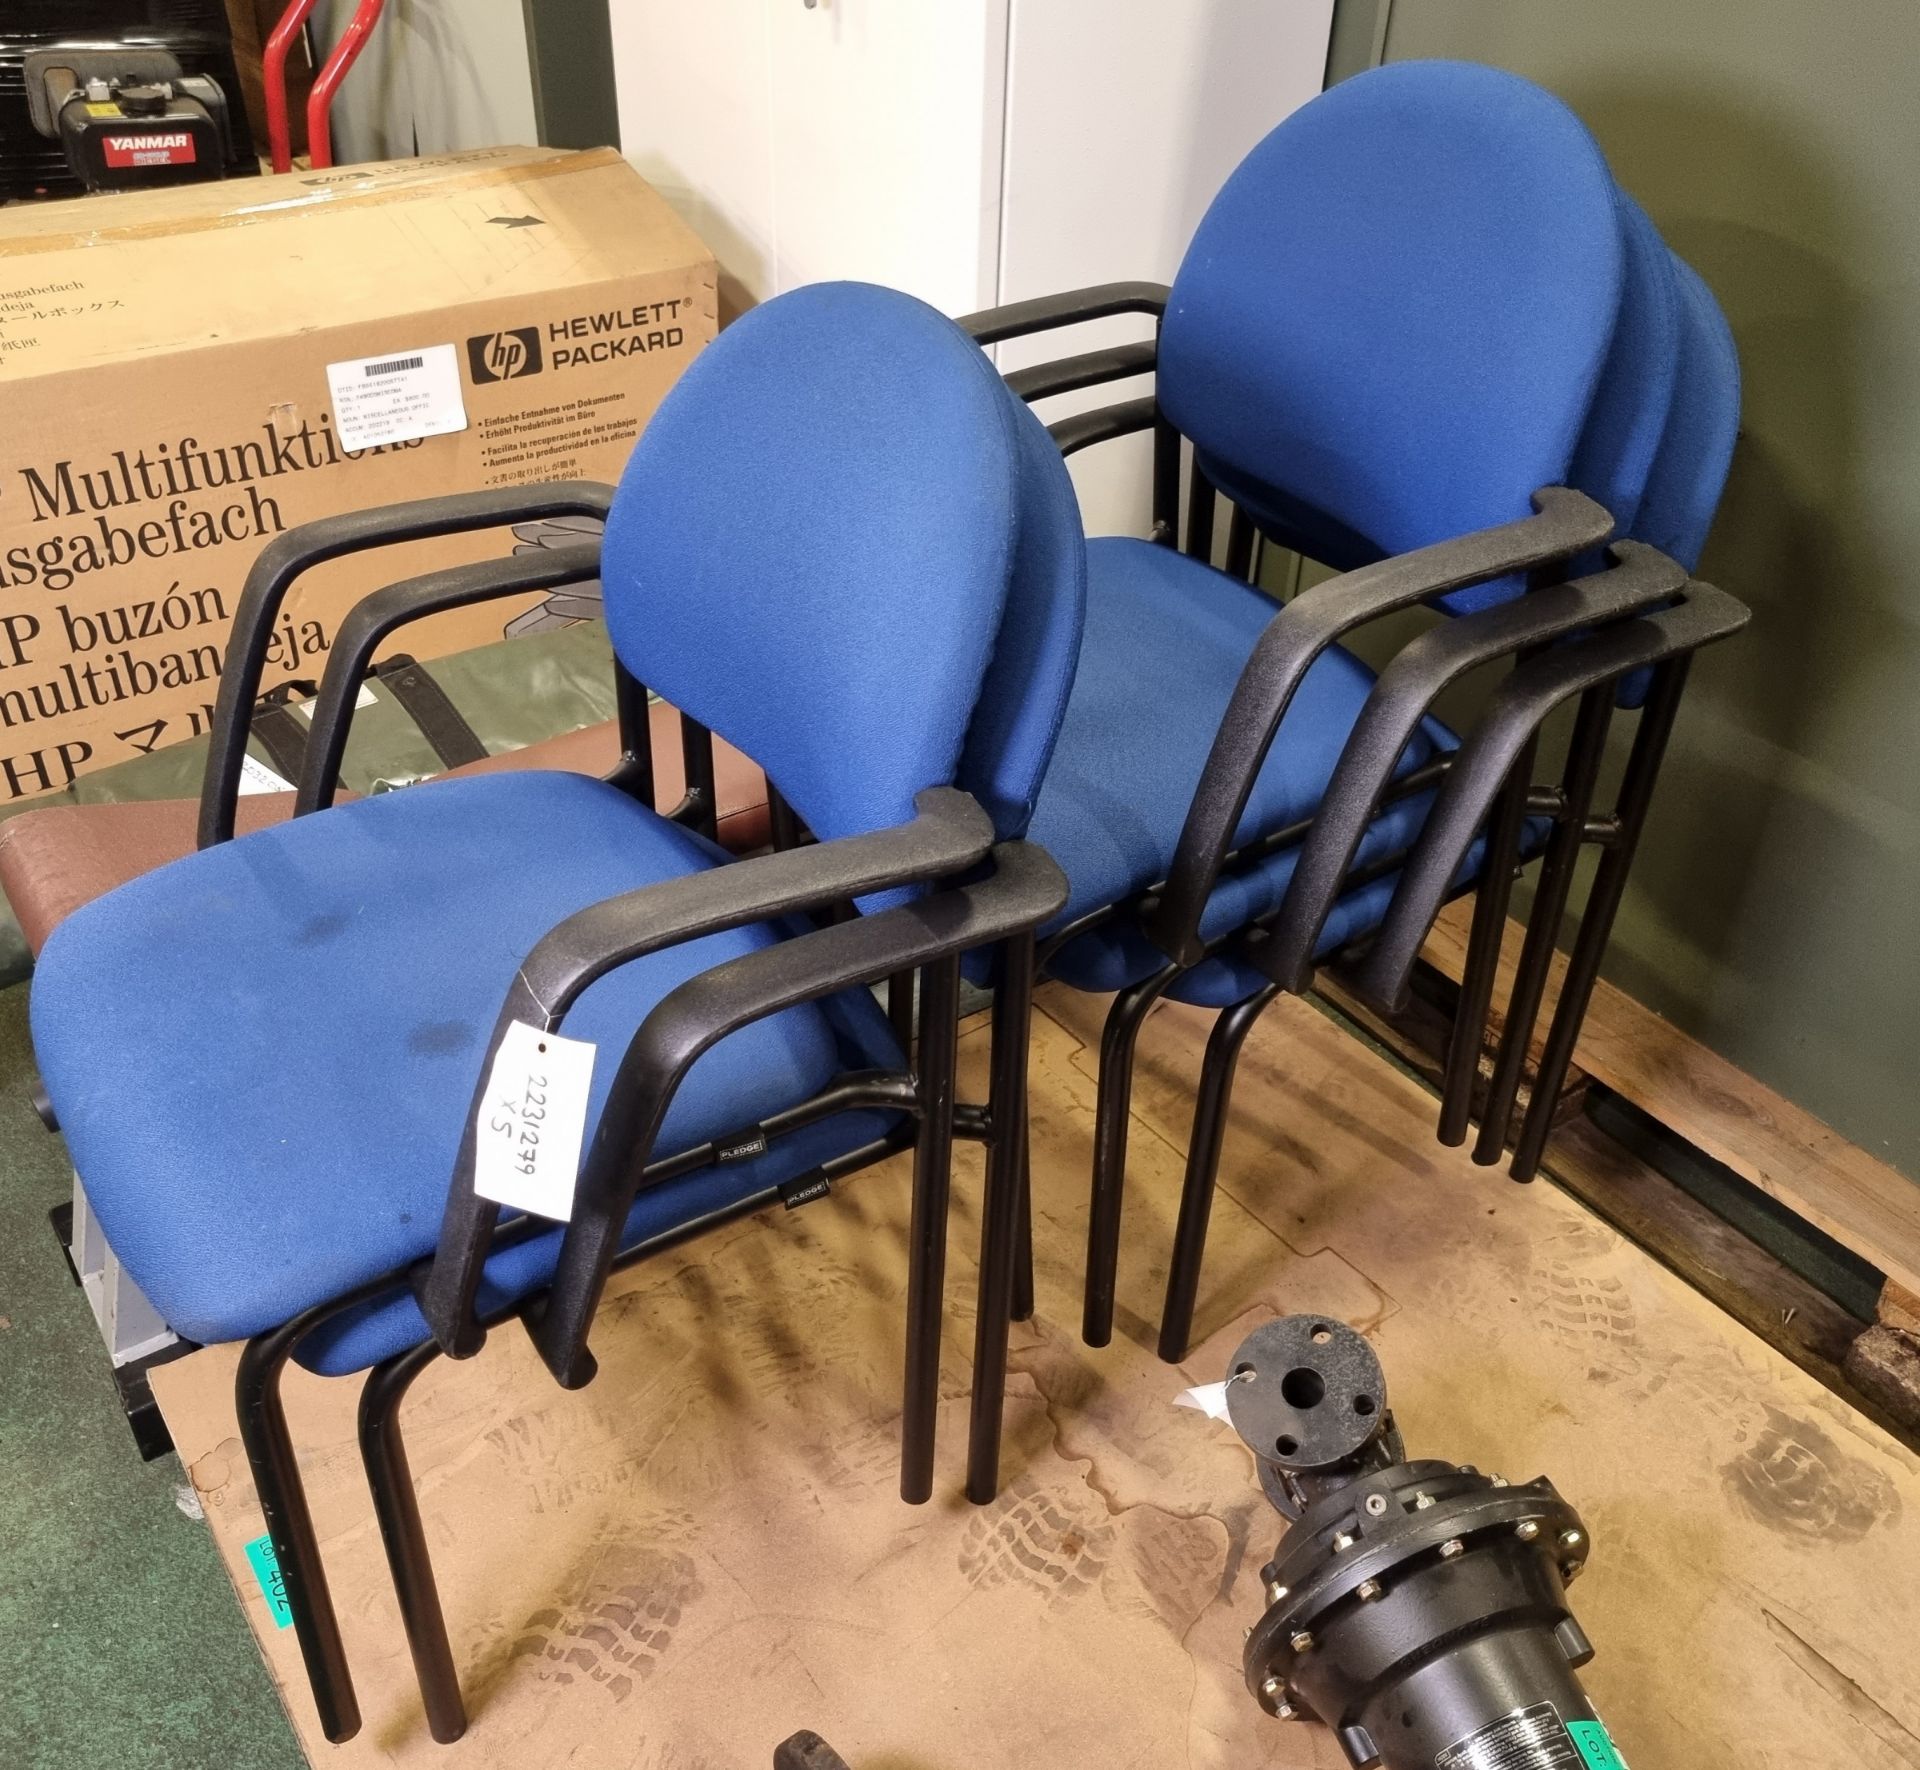 5x Stacking chairs 7110-99-3540513-YS005 L 60 x W 60 x H 86 cm - Image 3 of 3